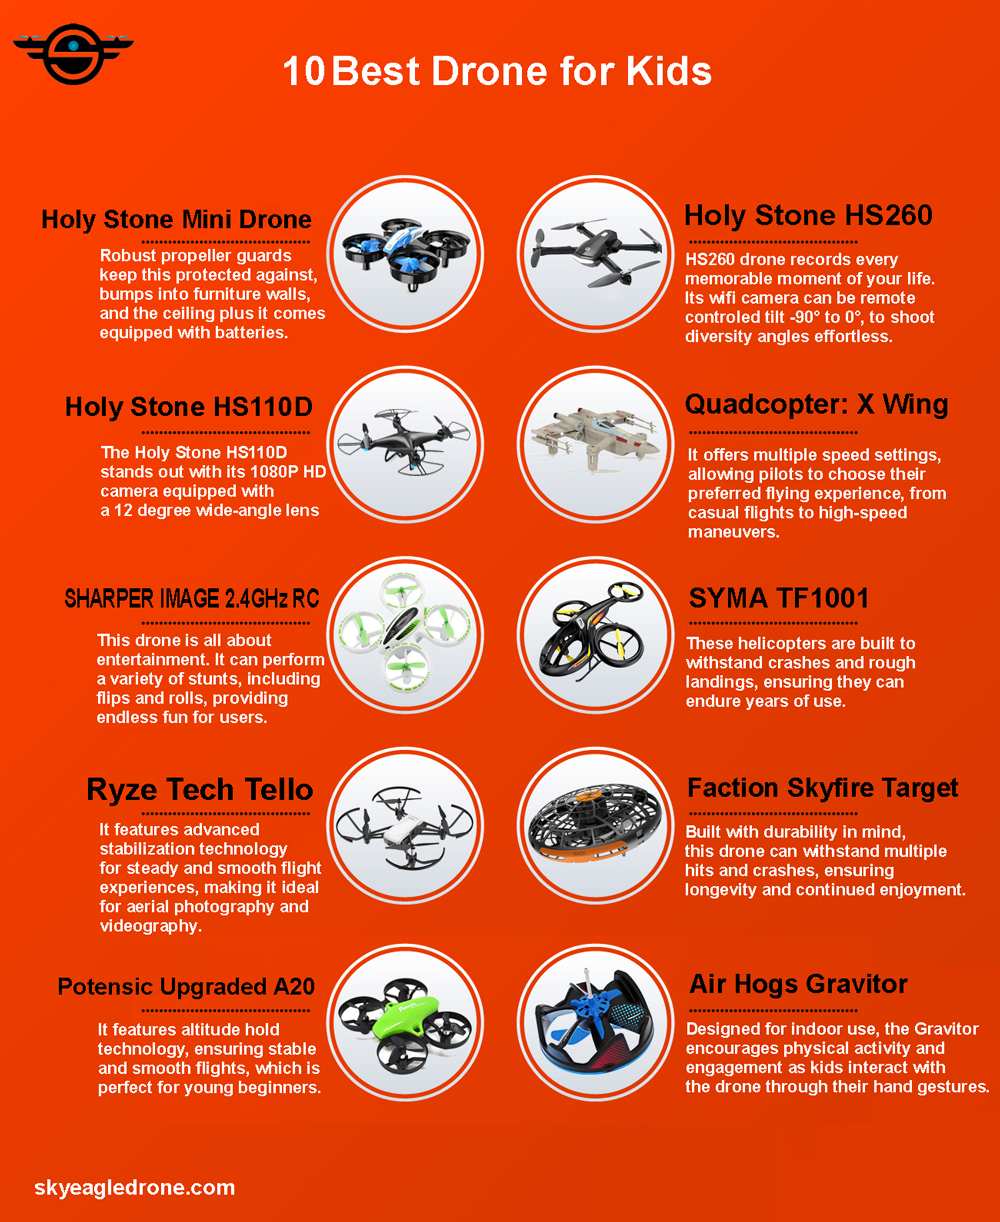 the Best Drone for Kids infographic